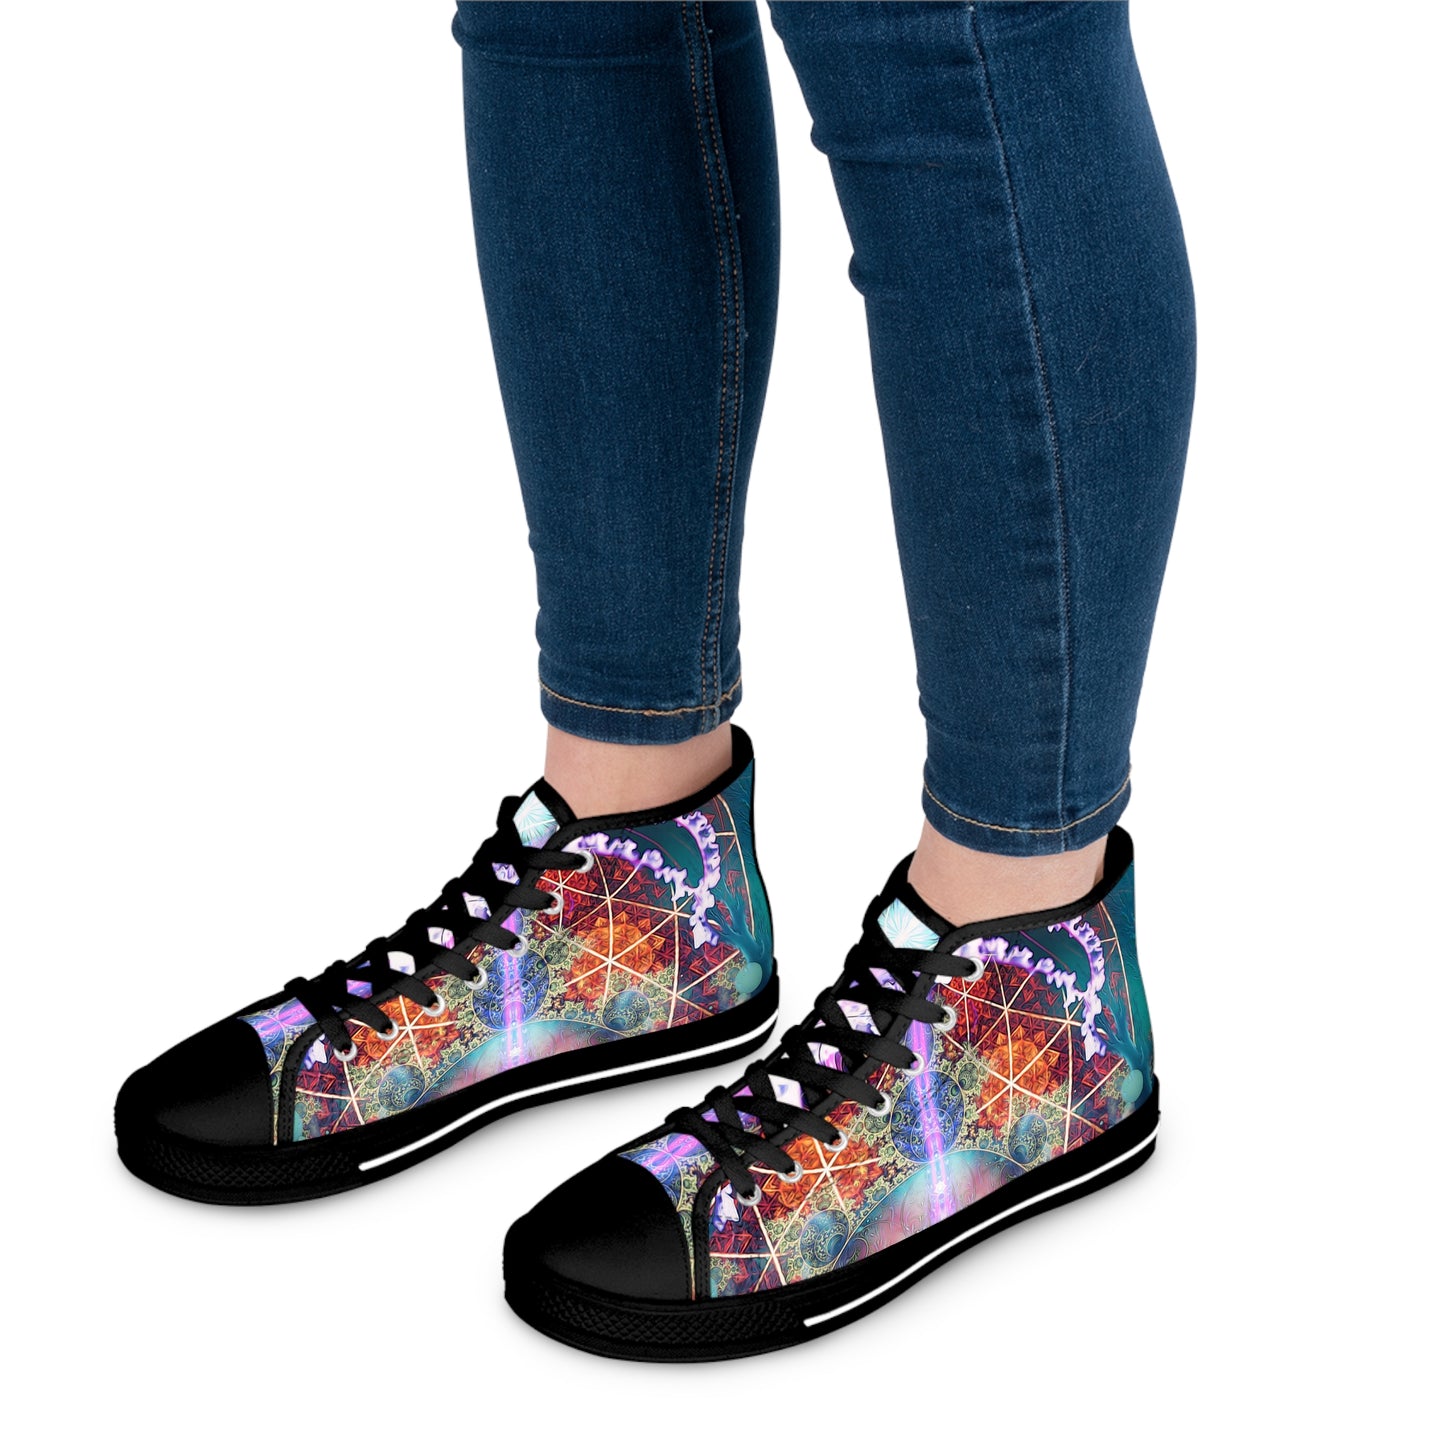 "Primordial Soup" WOMEN'S HIGHT TOP SNEAKERS